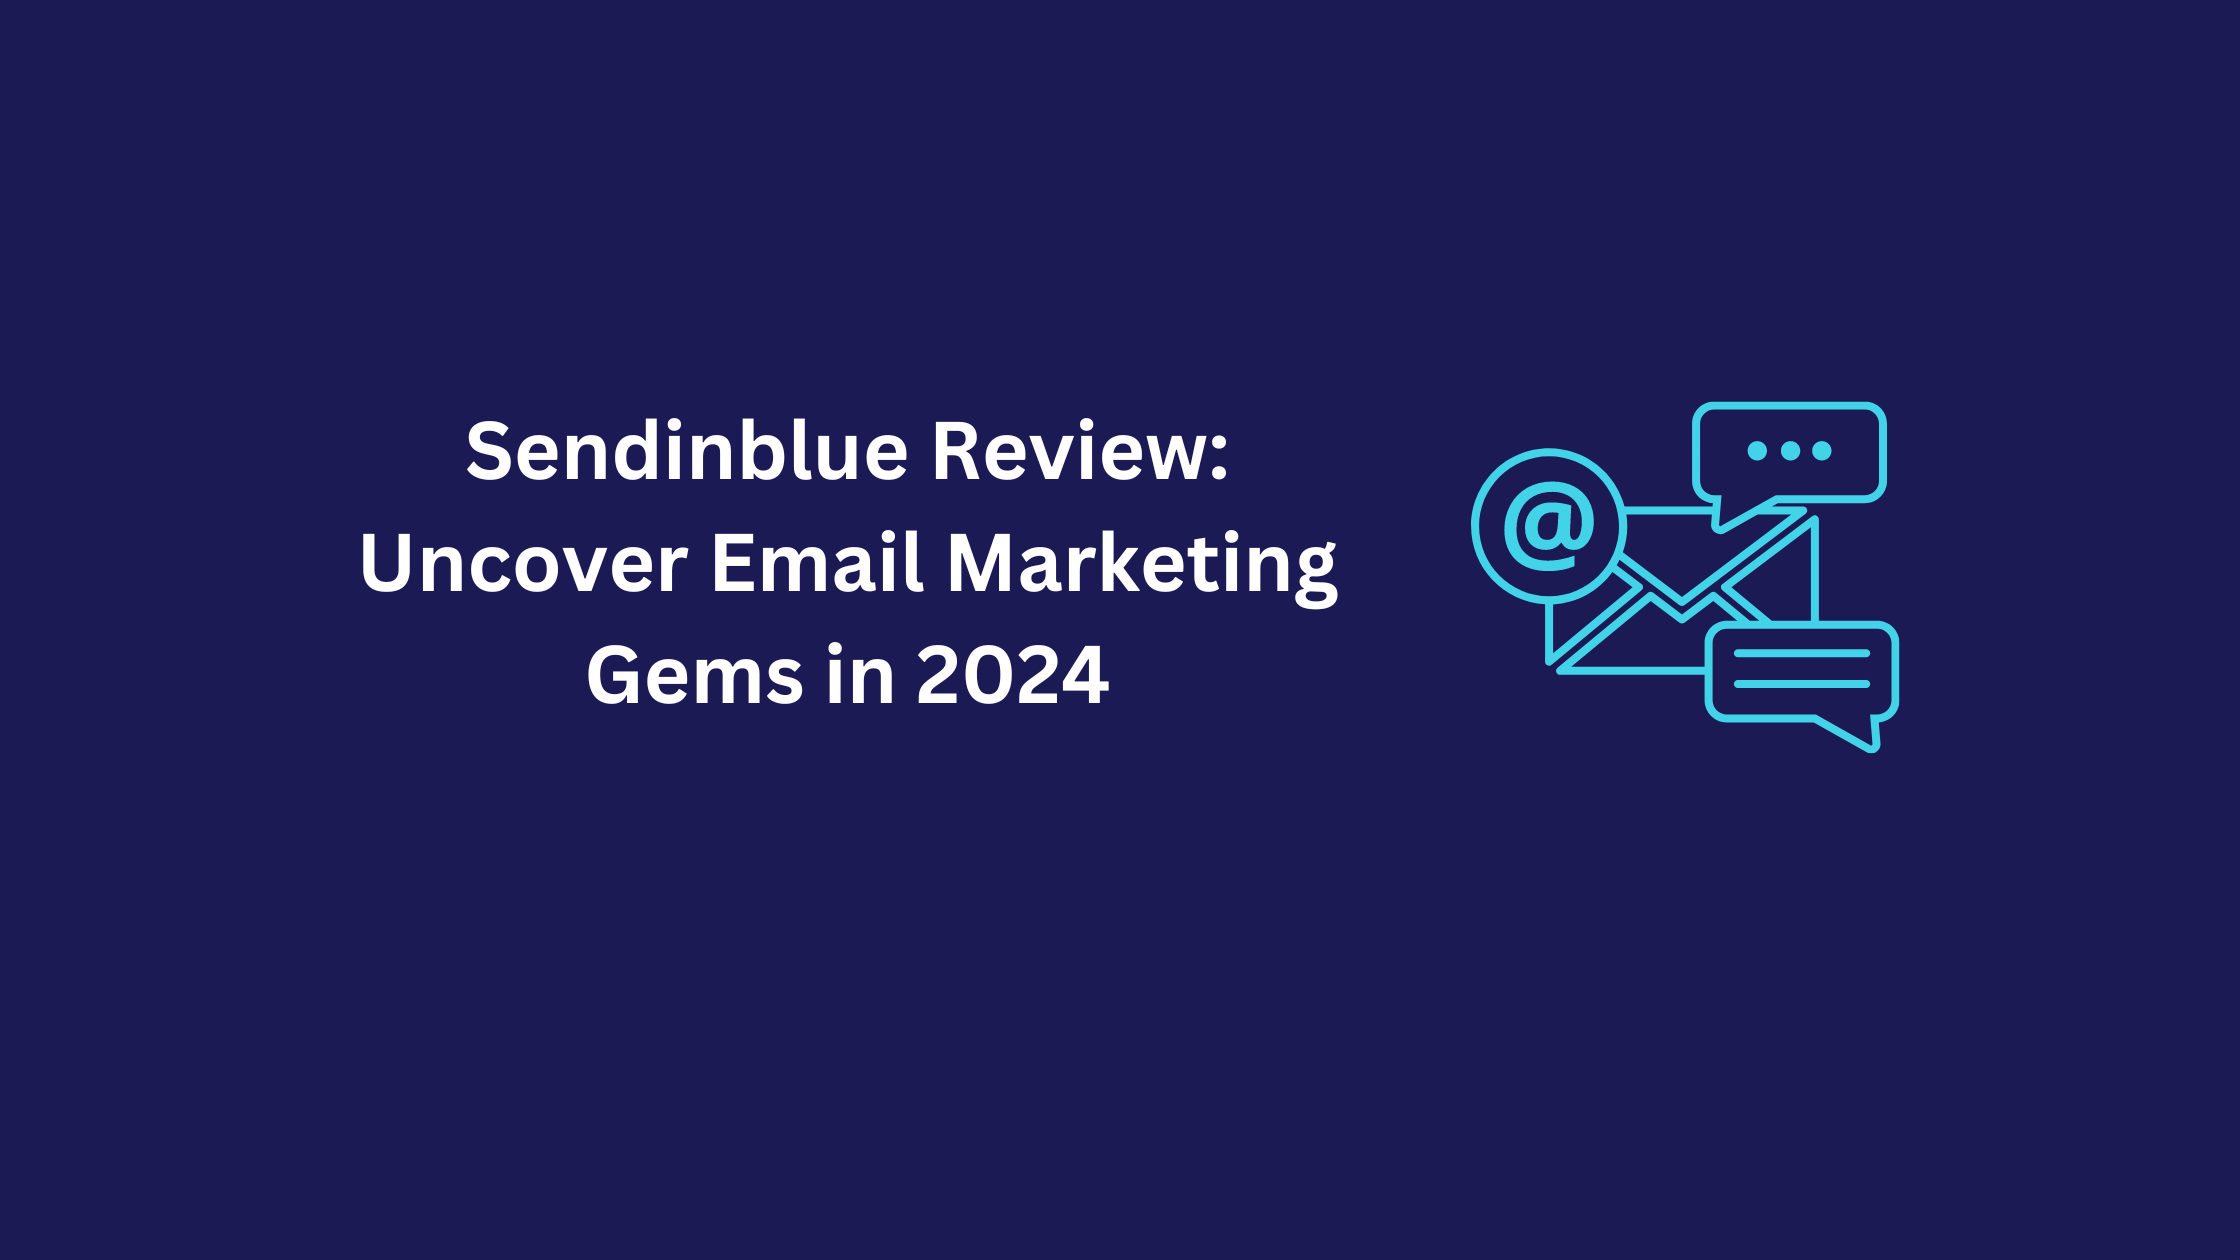 Sendinblue Review: Uncover Email Marketing Gems in 2024